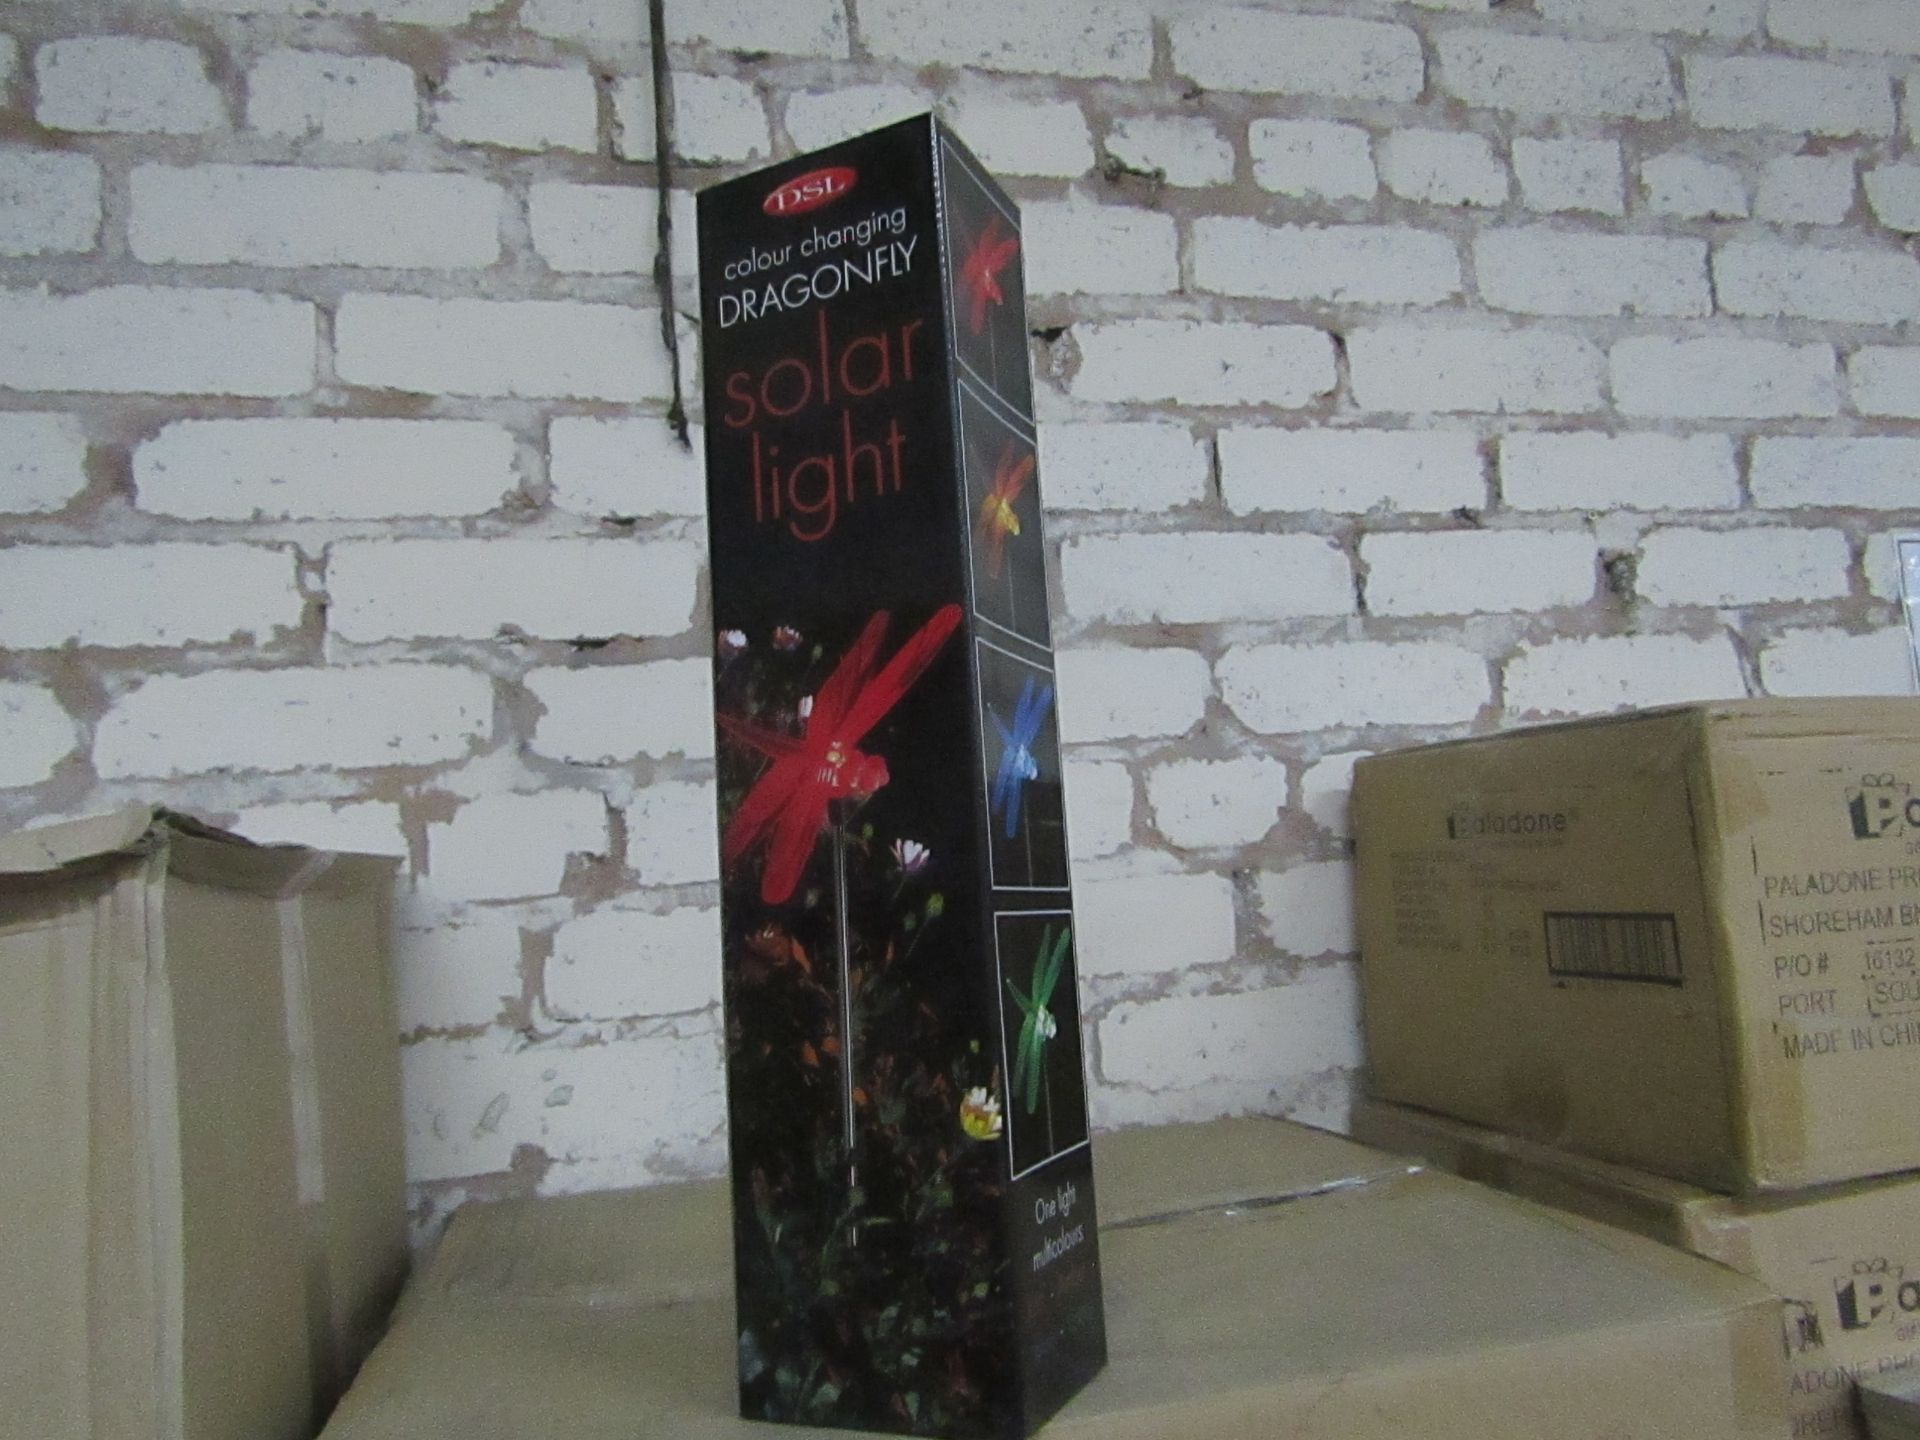 DSL - Colour Changing DragonFly Solar Light - Unchecked & Boxed.